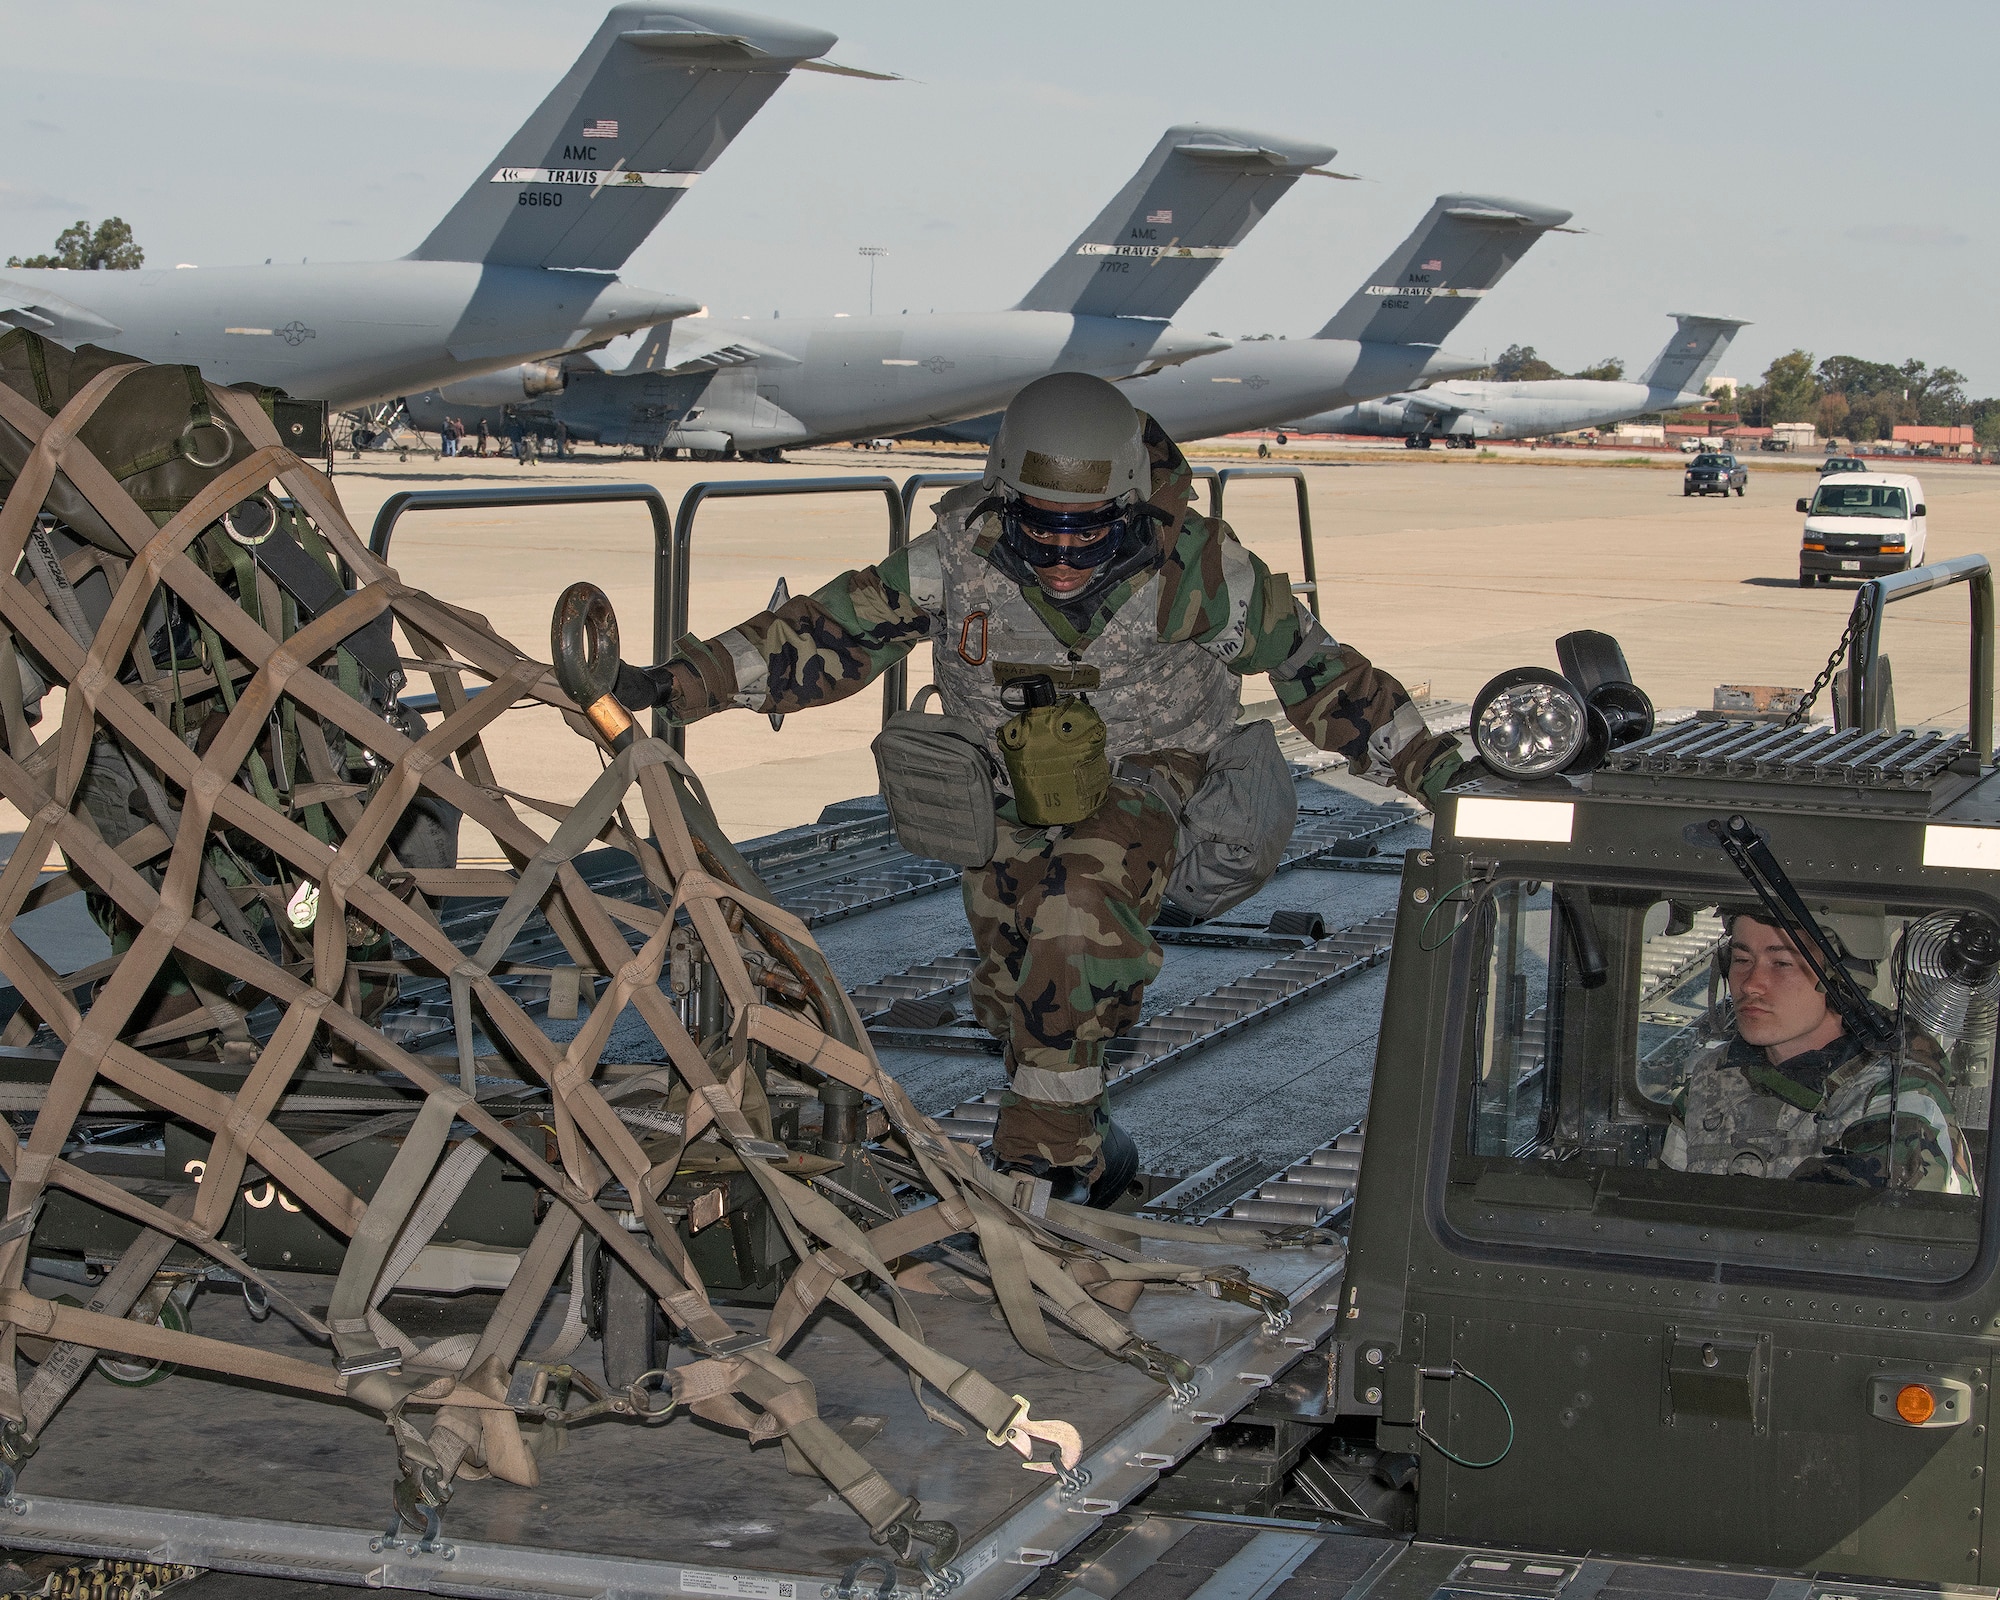 U.S. Air Force Airmen assigned to the 60th Aerial Port Squadron perform a cargo load during a readiness exercise at Travis Air Force Base, California, May 7, 2019. The base conducted a week-long exercise that evaluated Travis’ readiness and ability to execute and sustain rapid global mobility around the world. (U.S. Air Force photo by Louis Briscese)